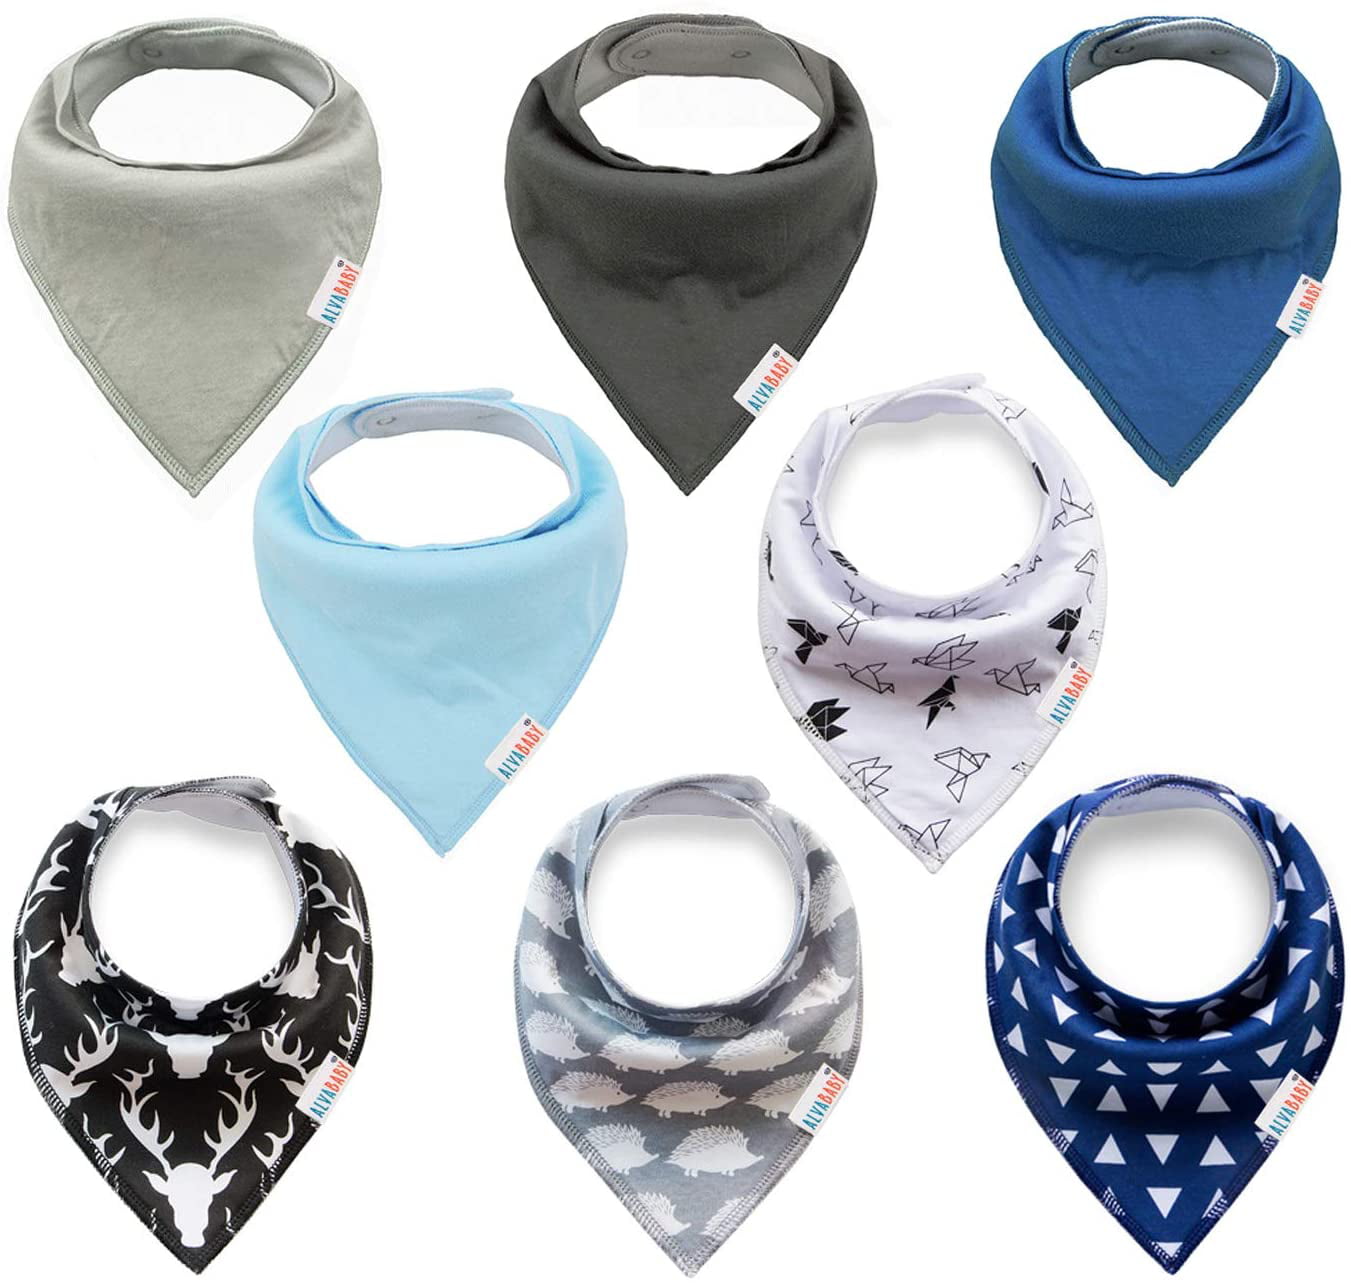 ALVABABY Bandana Drool Bibs Feeding Resuable for Boys& Girls Floral 8 Pack of Super Absorbent Baby Gift Sets 8SD24 